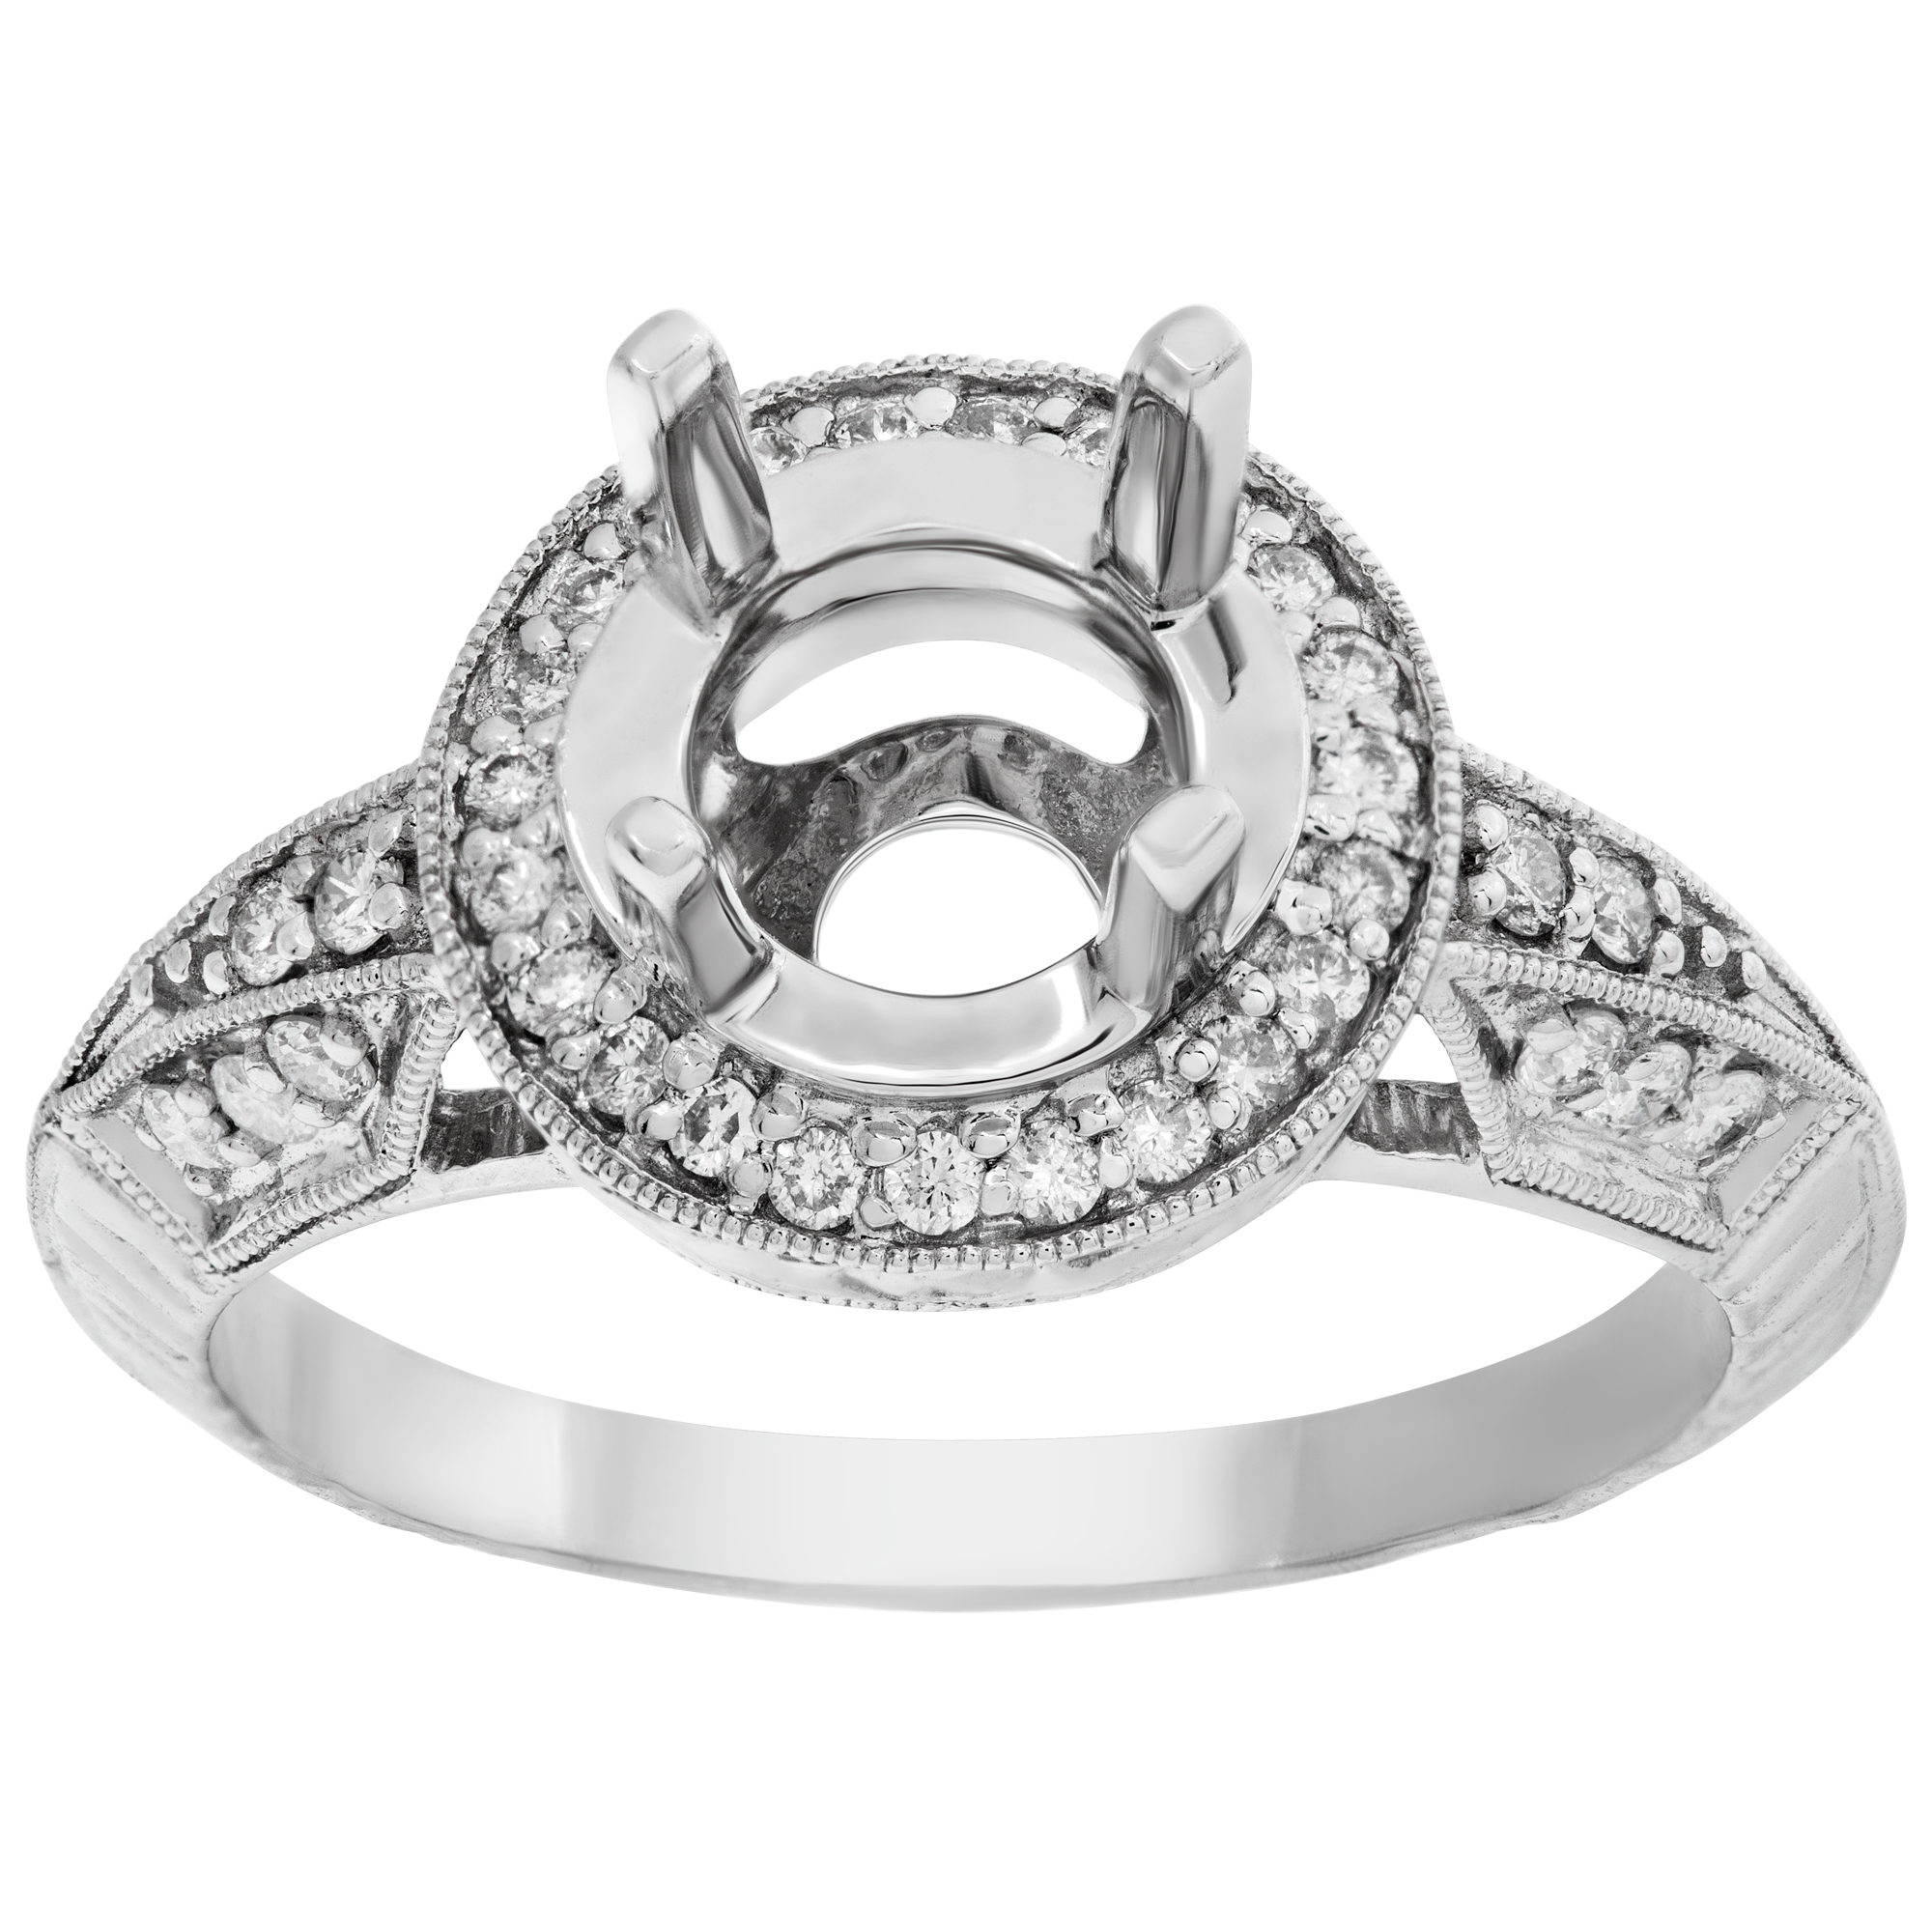 18k white gold round diamond pave setting; 1.09 cts in diamonds (H,SI1)